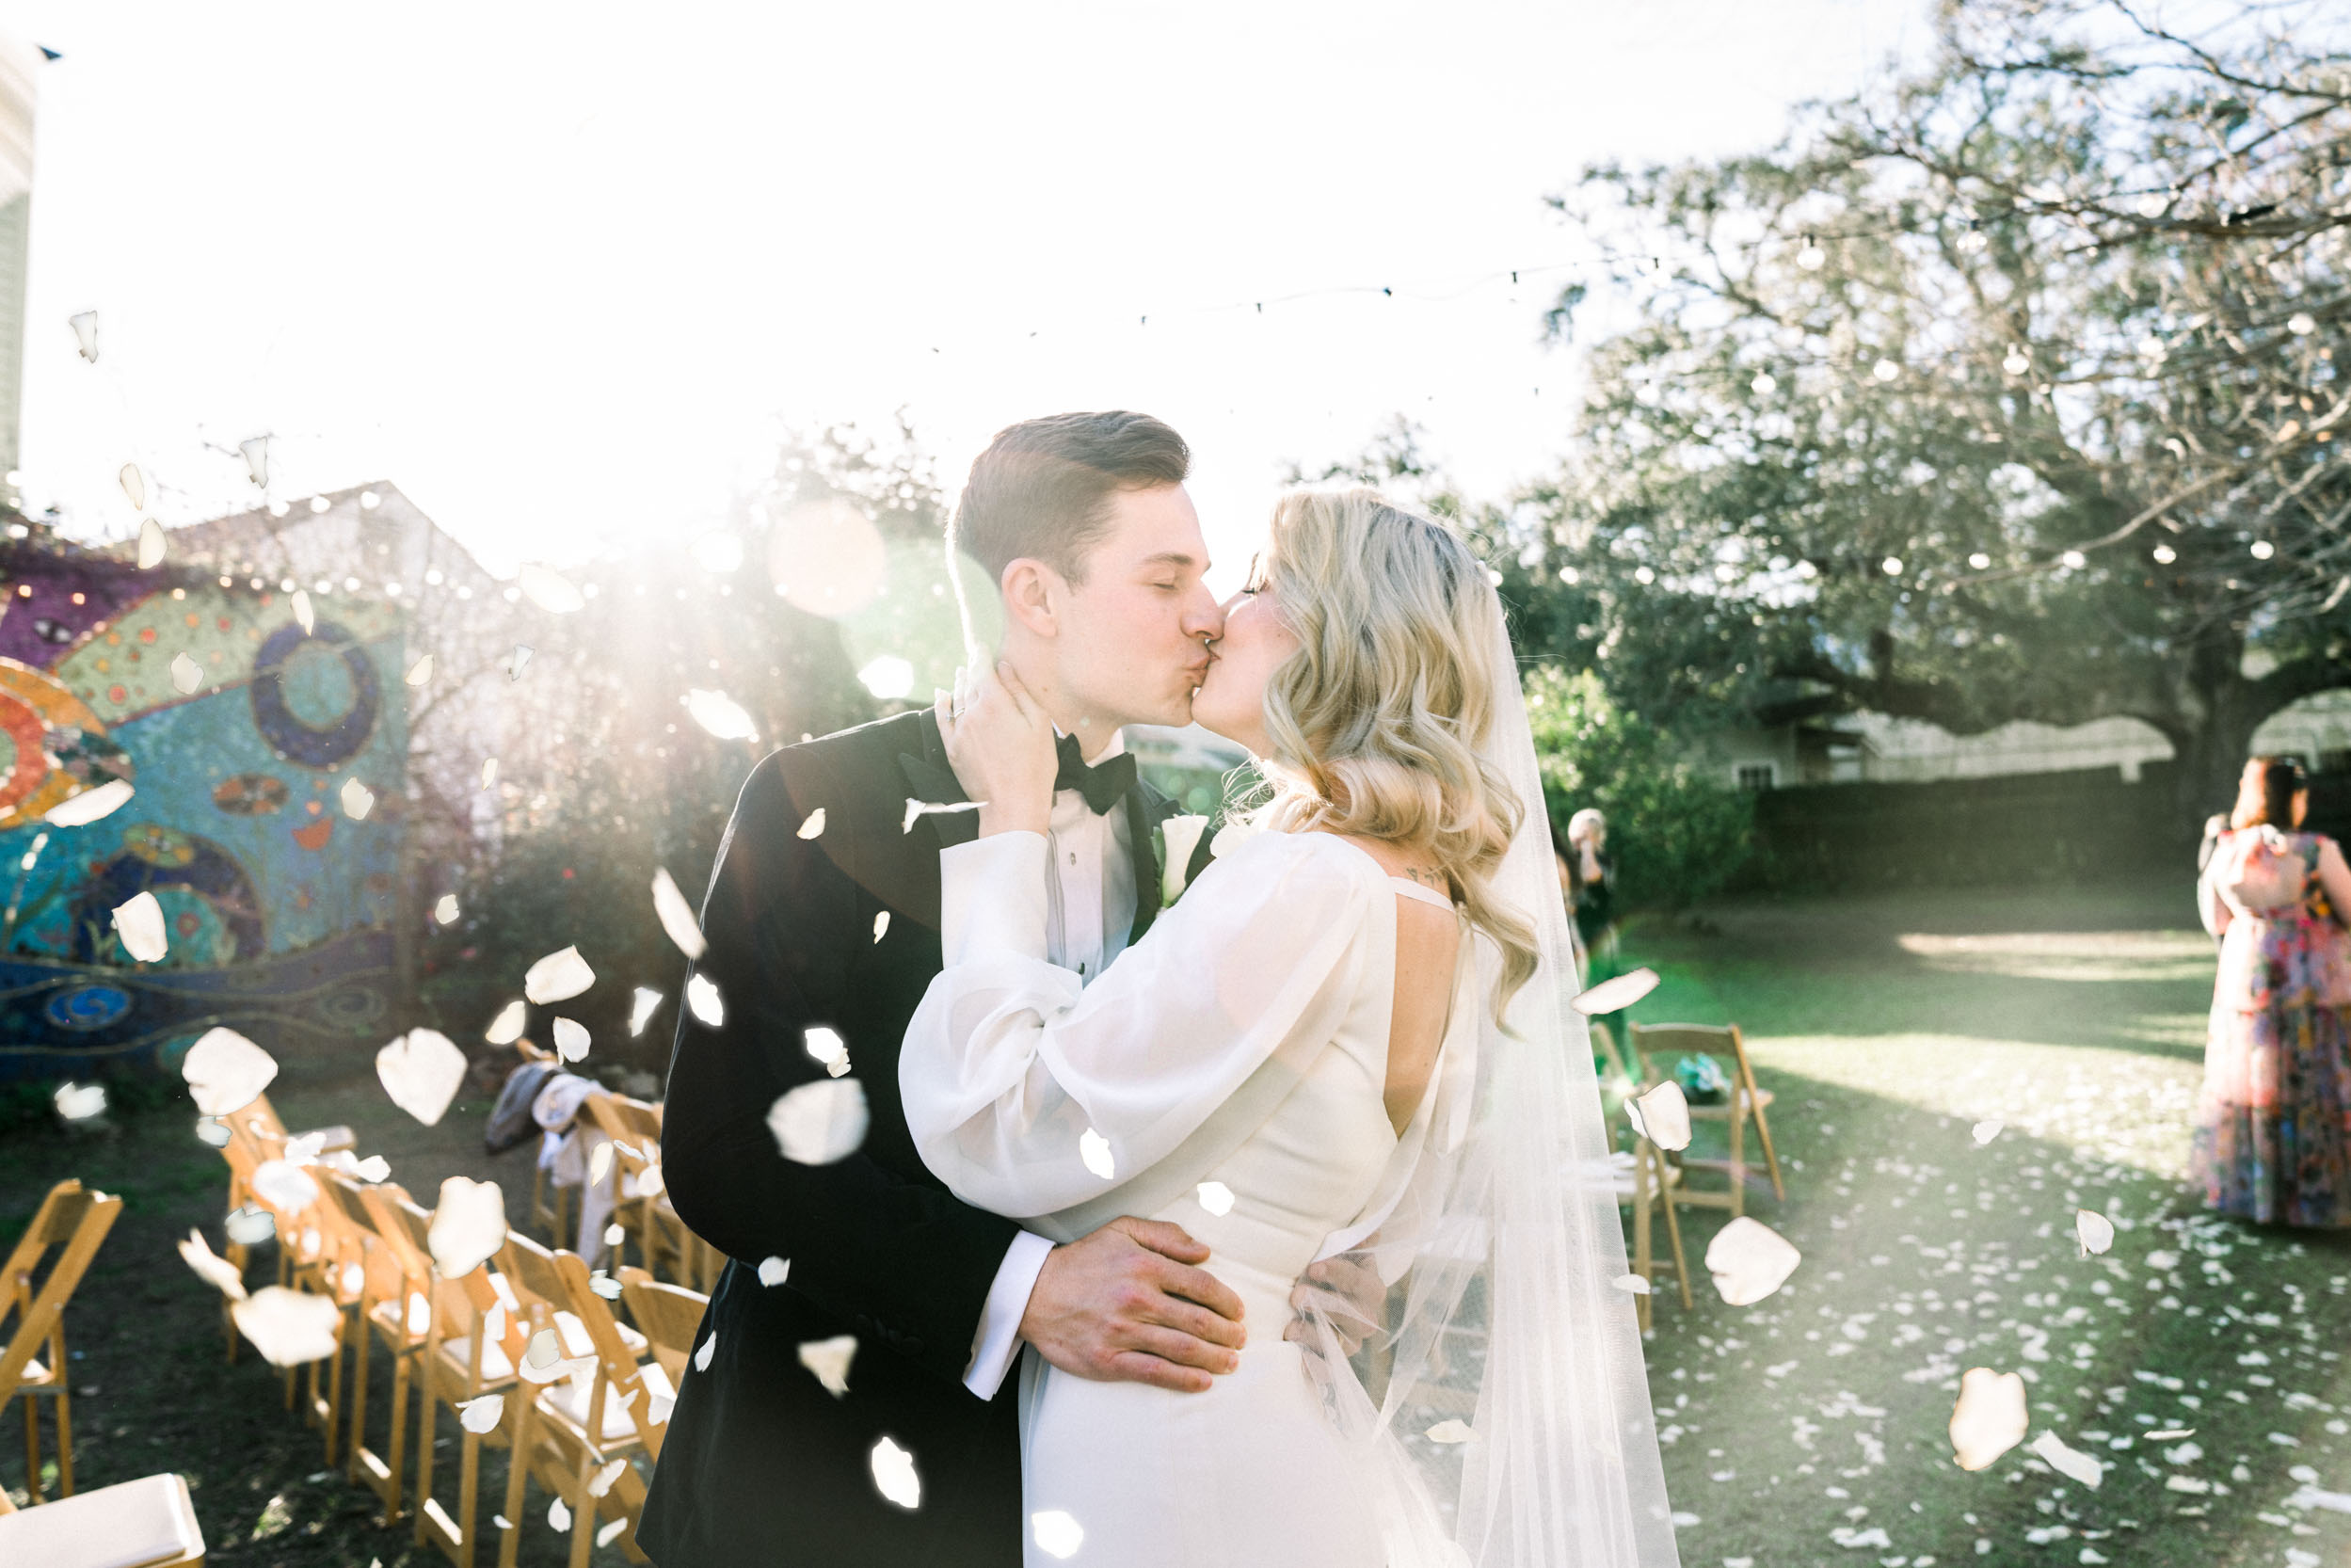 Bride and groom kising with rose petals in the air at Clouet Gardens in New Orleans